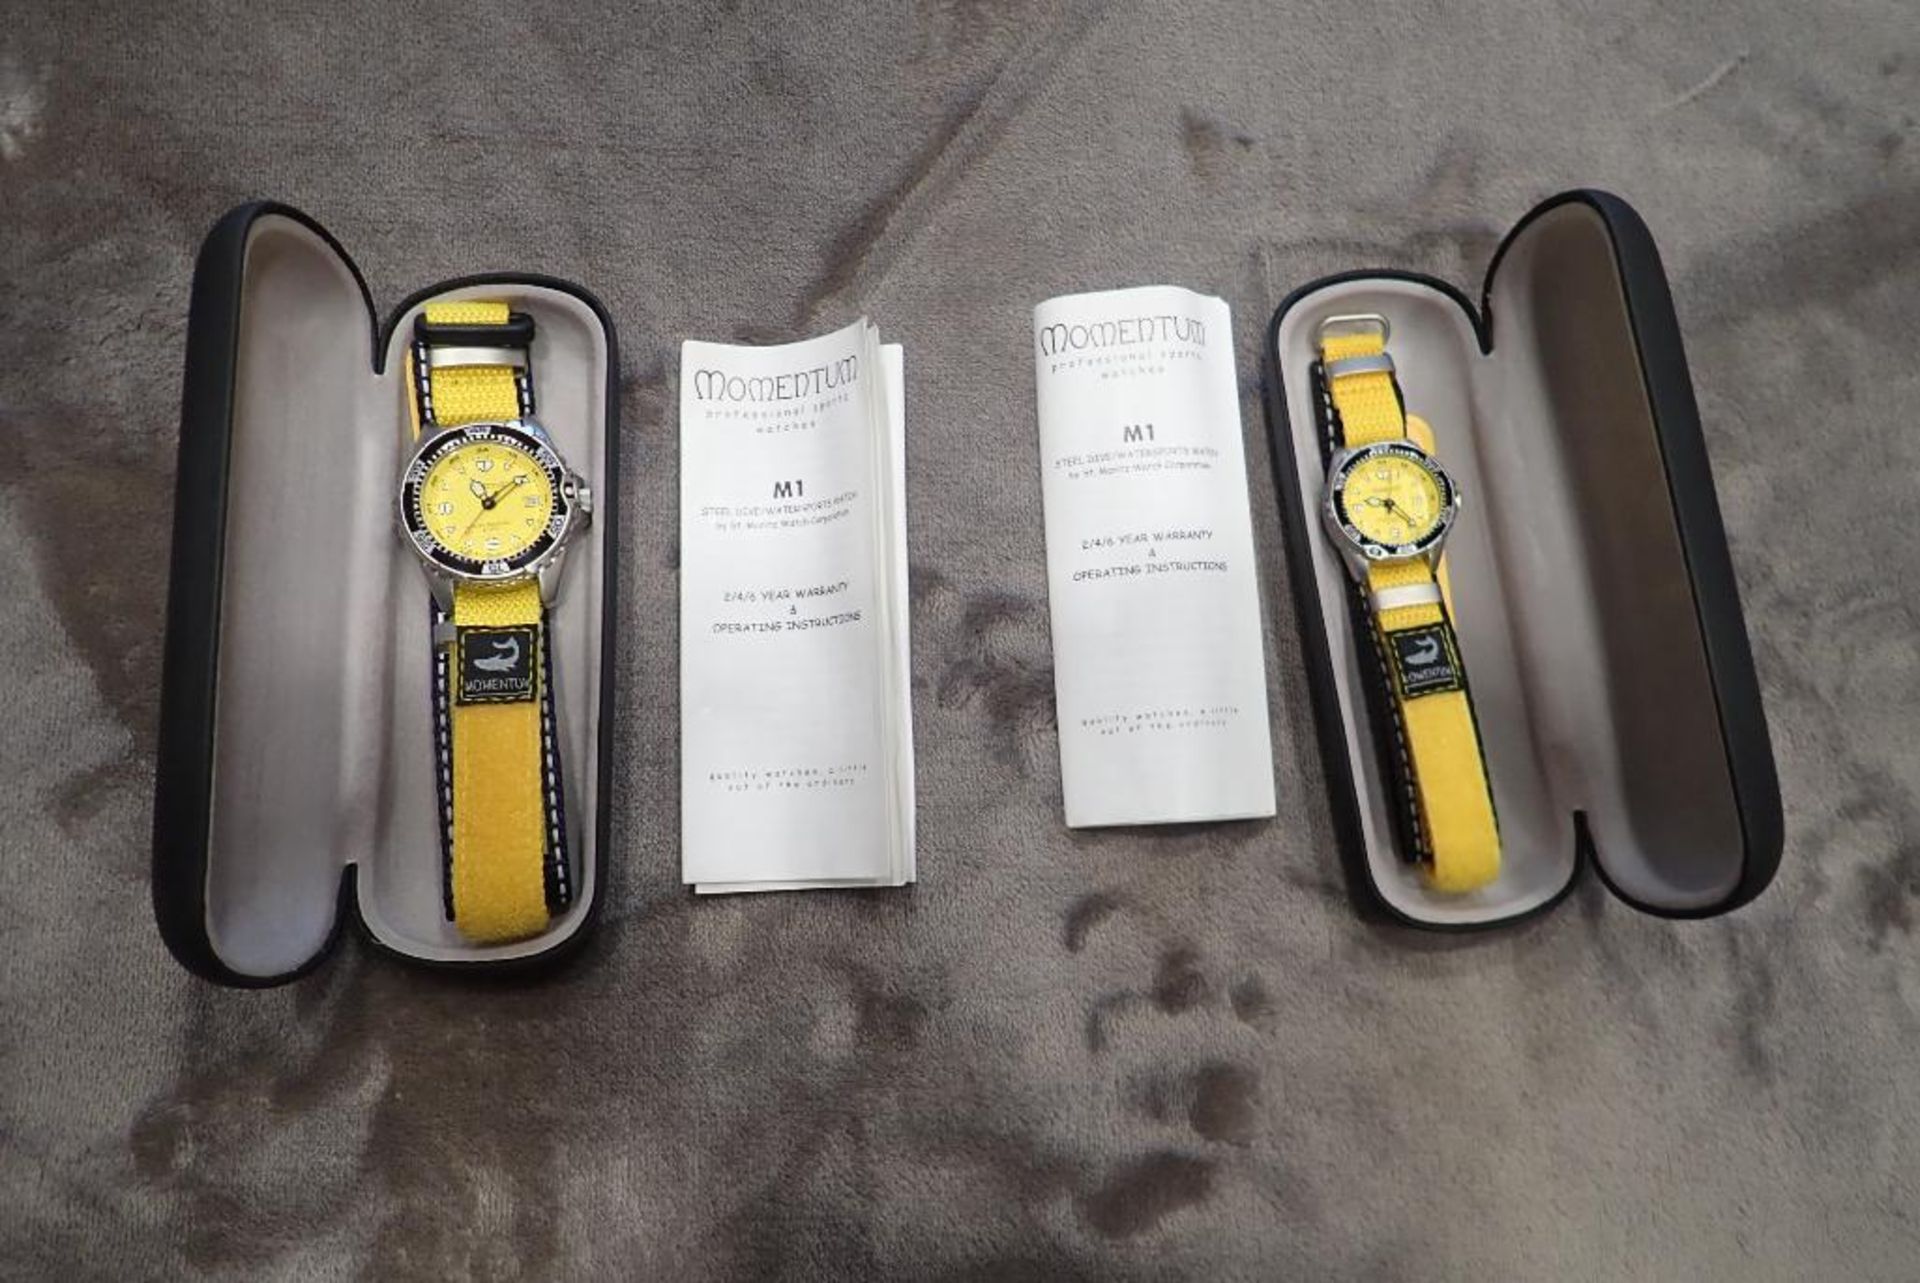 Lot of Momentum His and Hers Dive Watches- NEEDS BATTERIES.